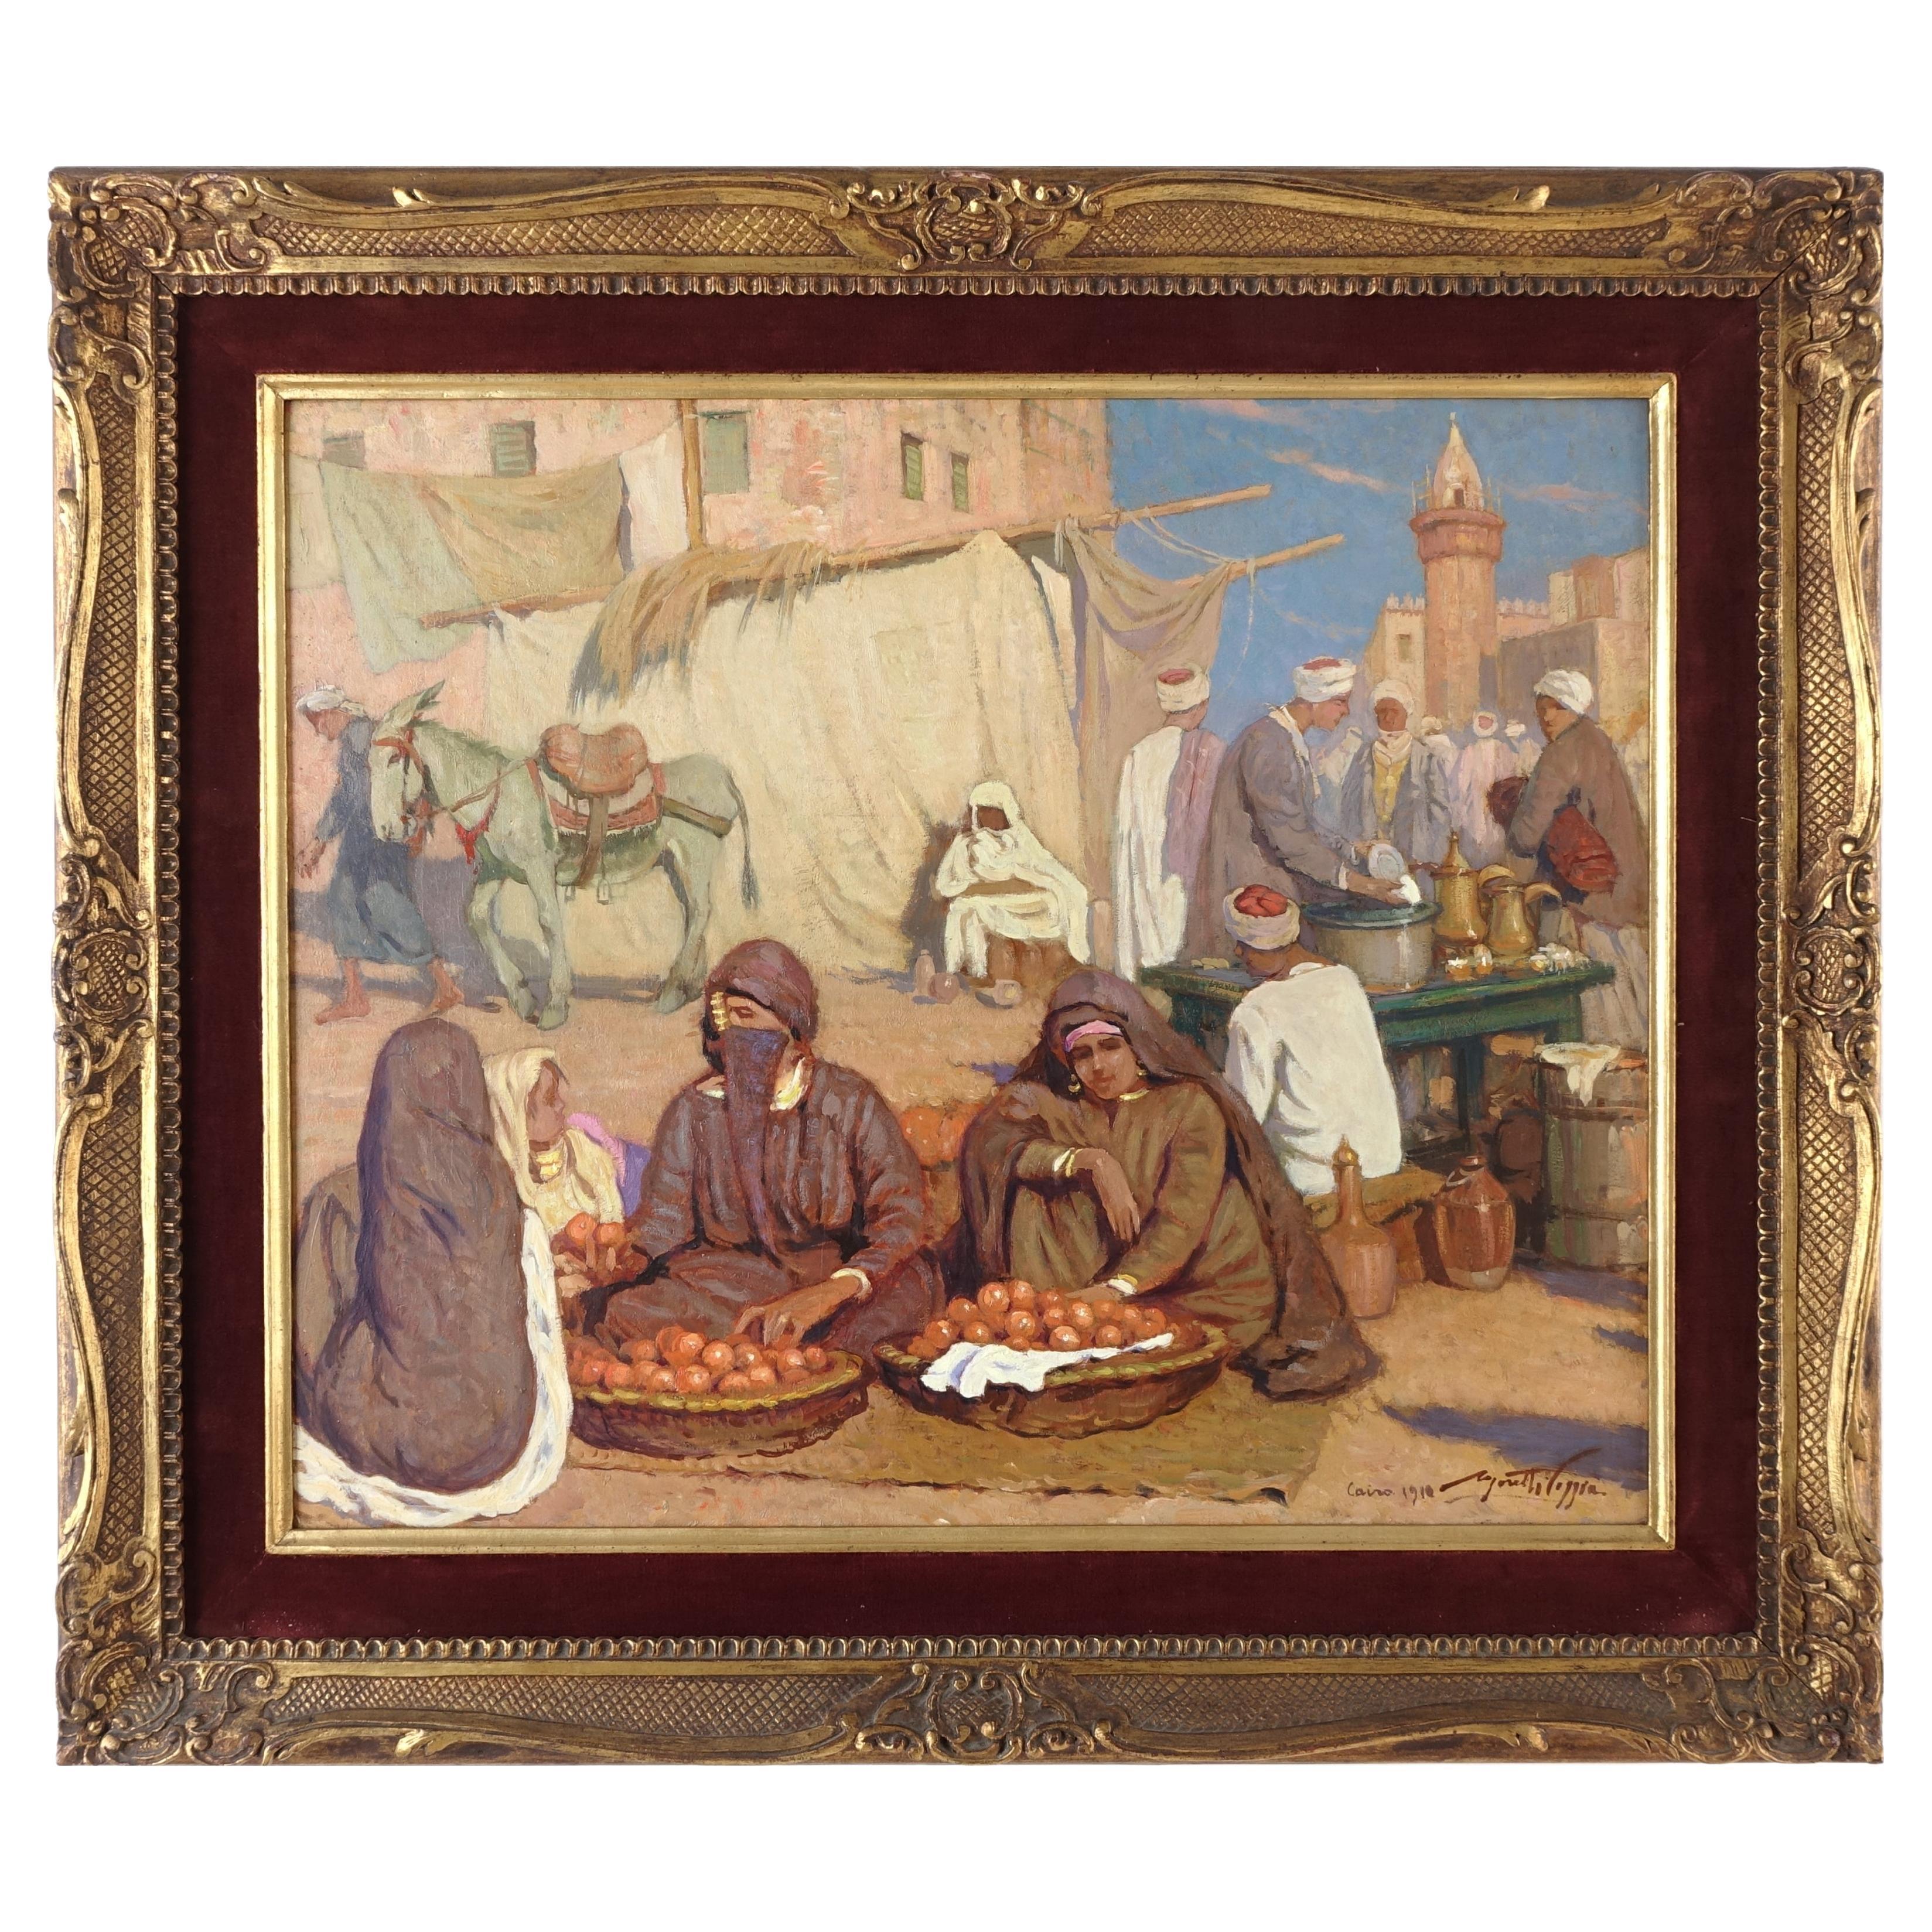 Orientalist Painting Signet and Dated Moretti Foggia 1910, Cairo